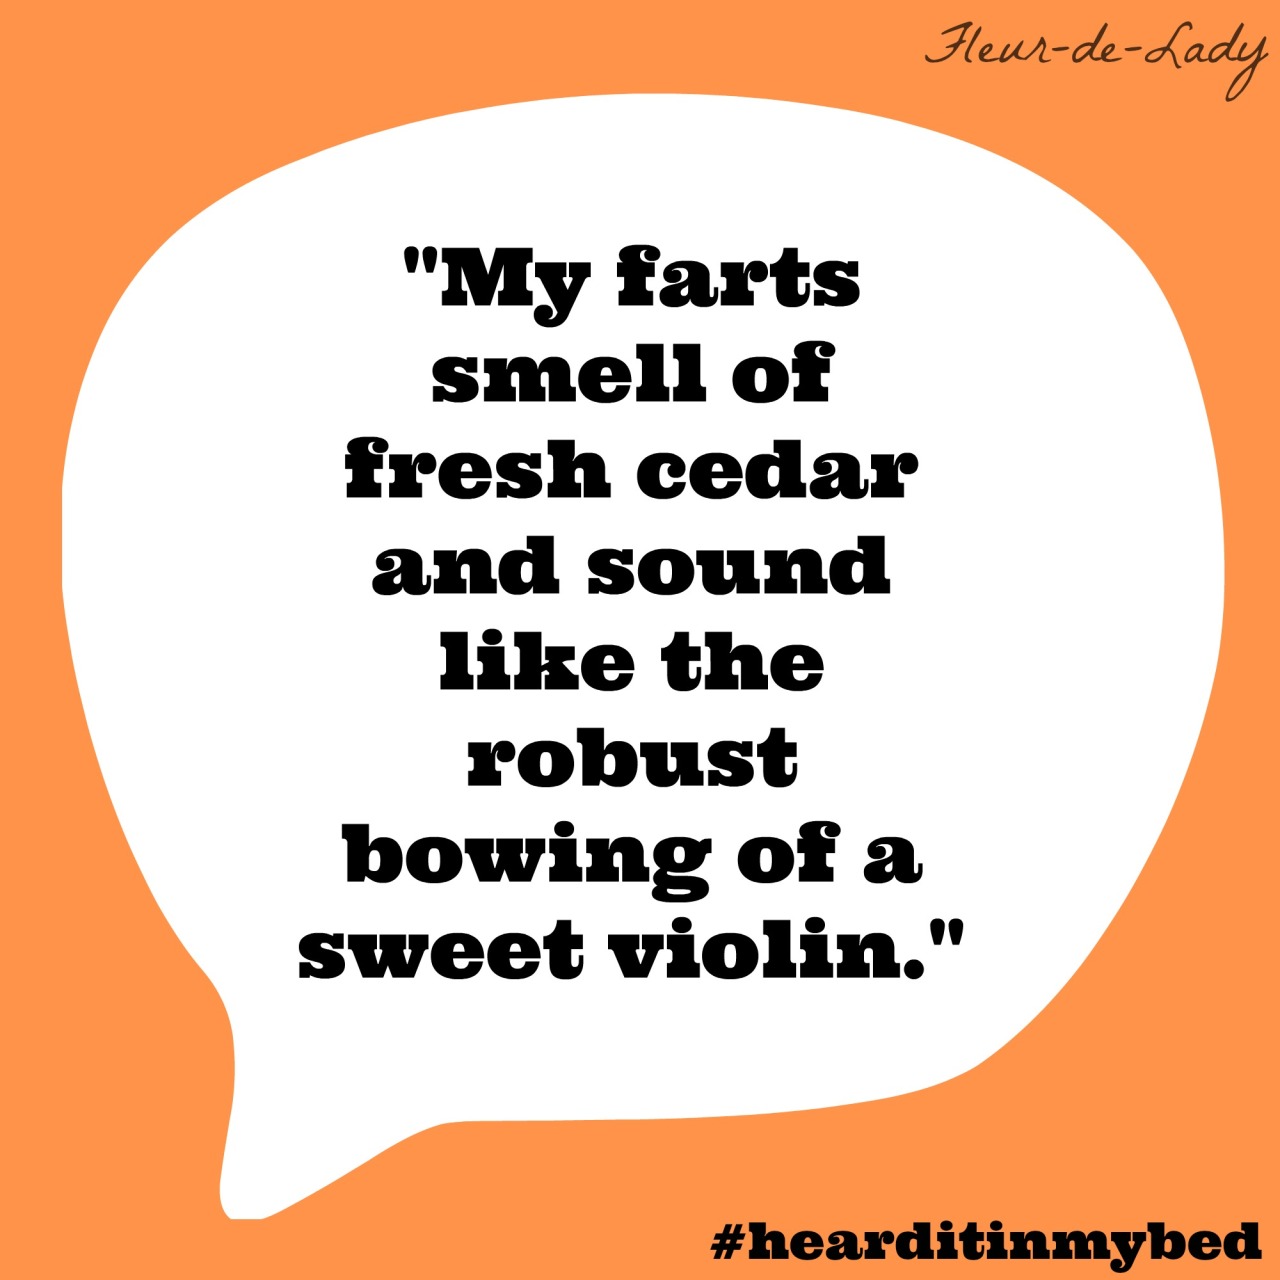 This is my life, and these are things my partners say. lol Lucky me? See more #hearditinmybed